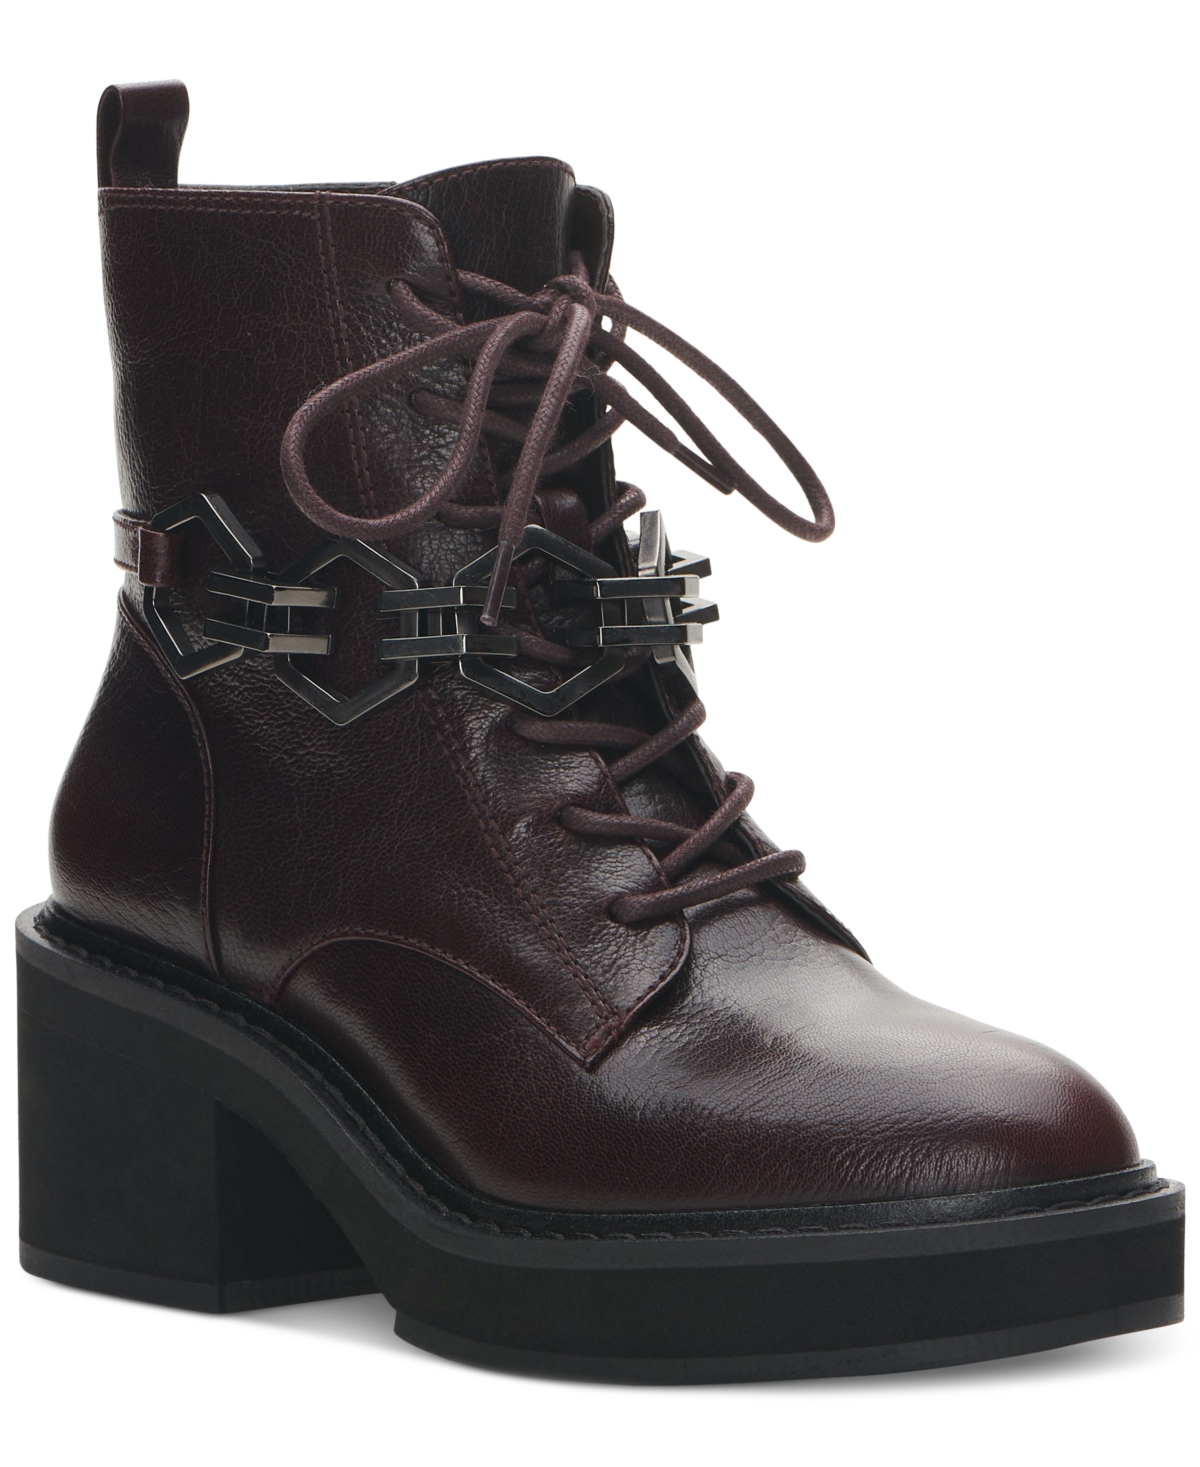 VINCE CAMUTO WOMEN'S KELTANA CHAINED LACE-UP COMBAT BOOTIES WOMEN'S SHOES